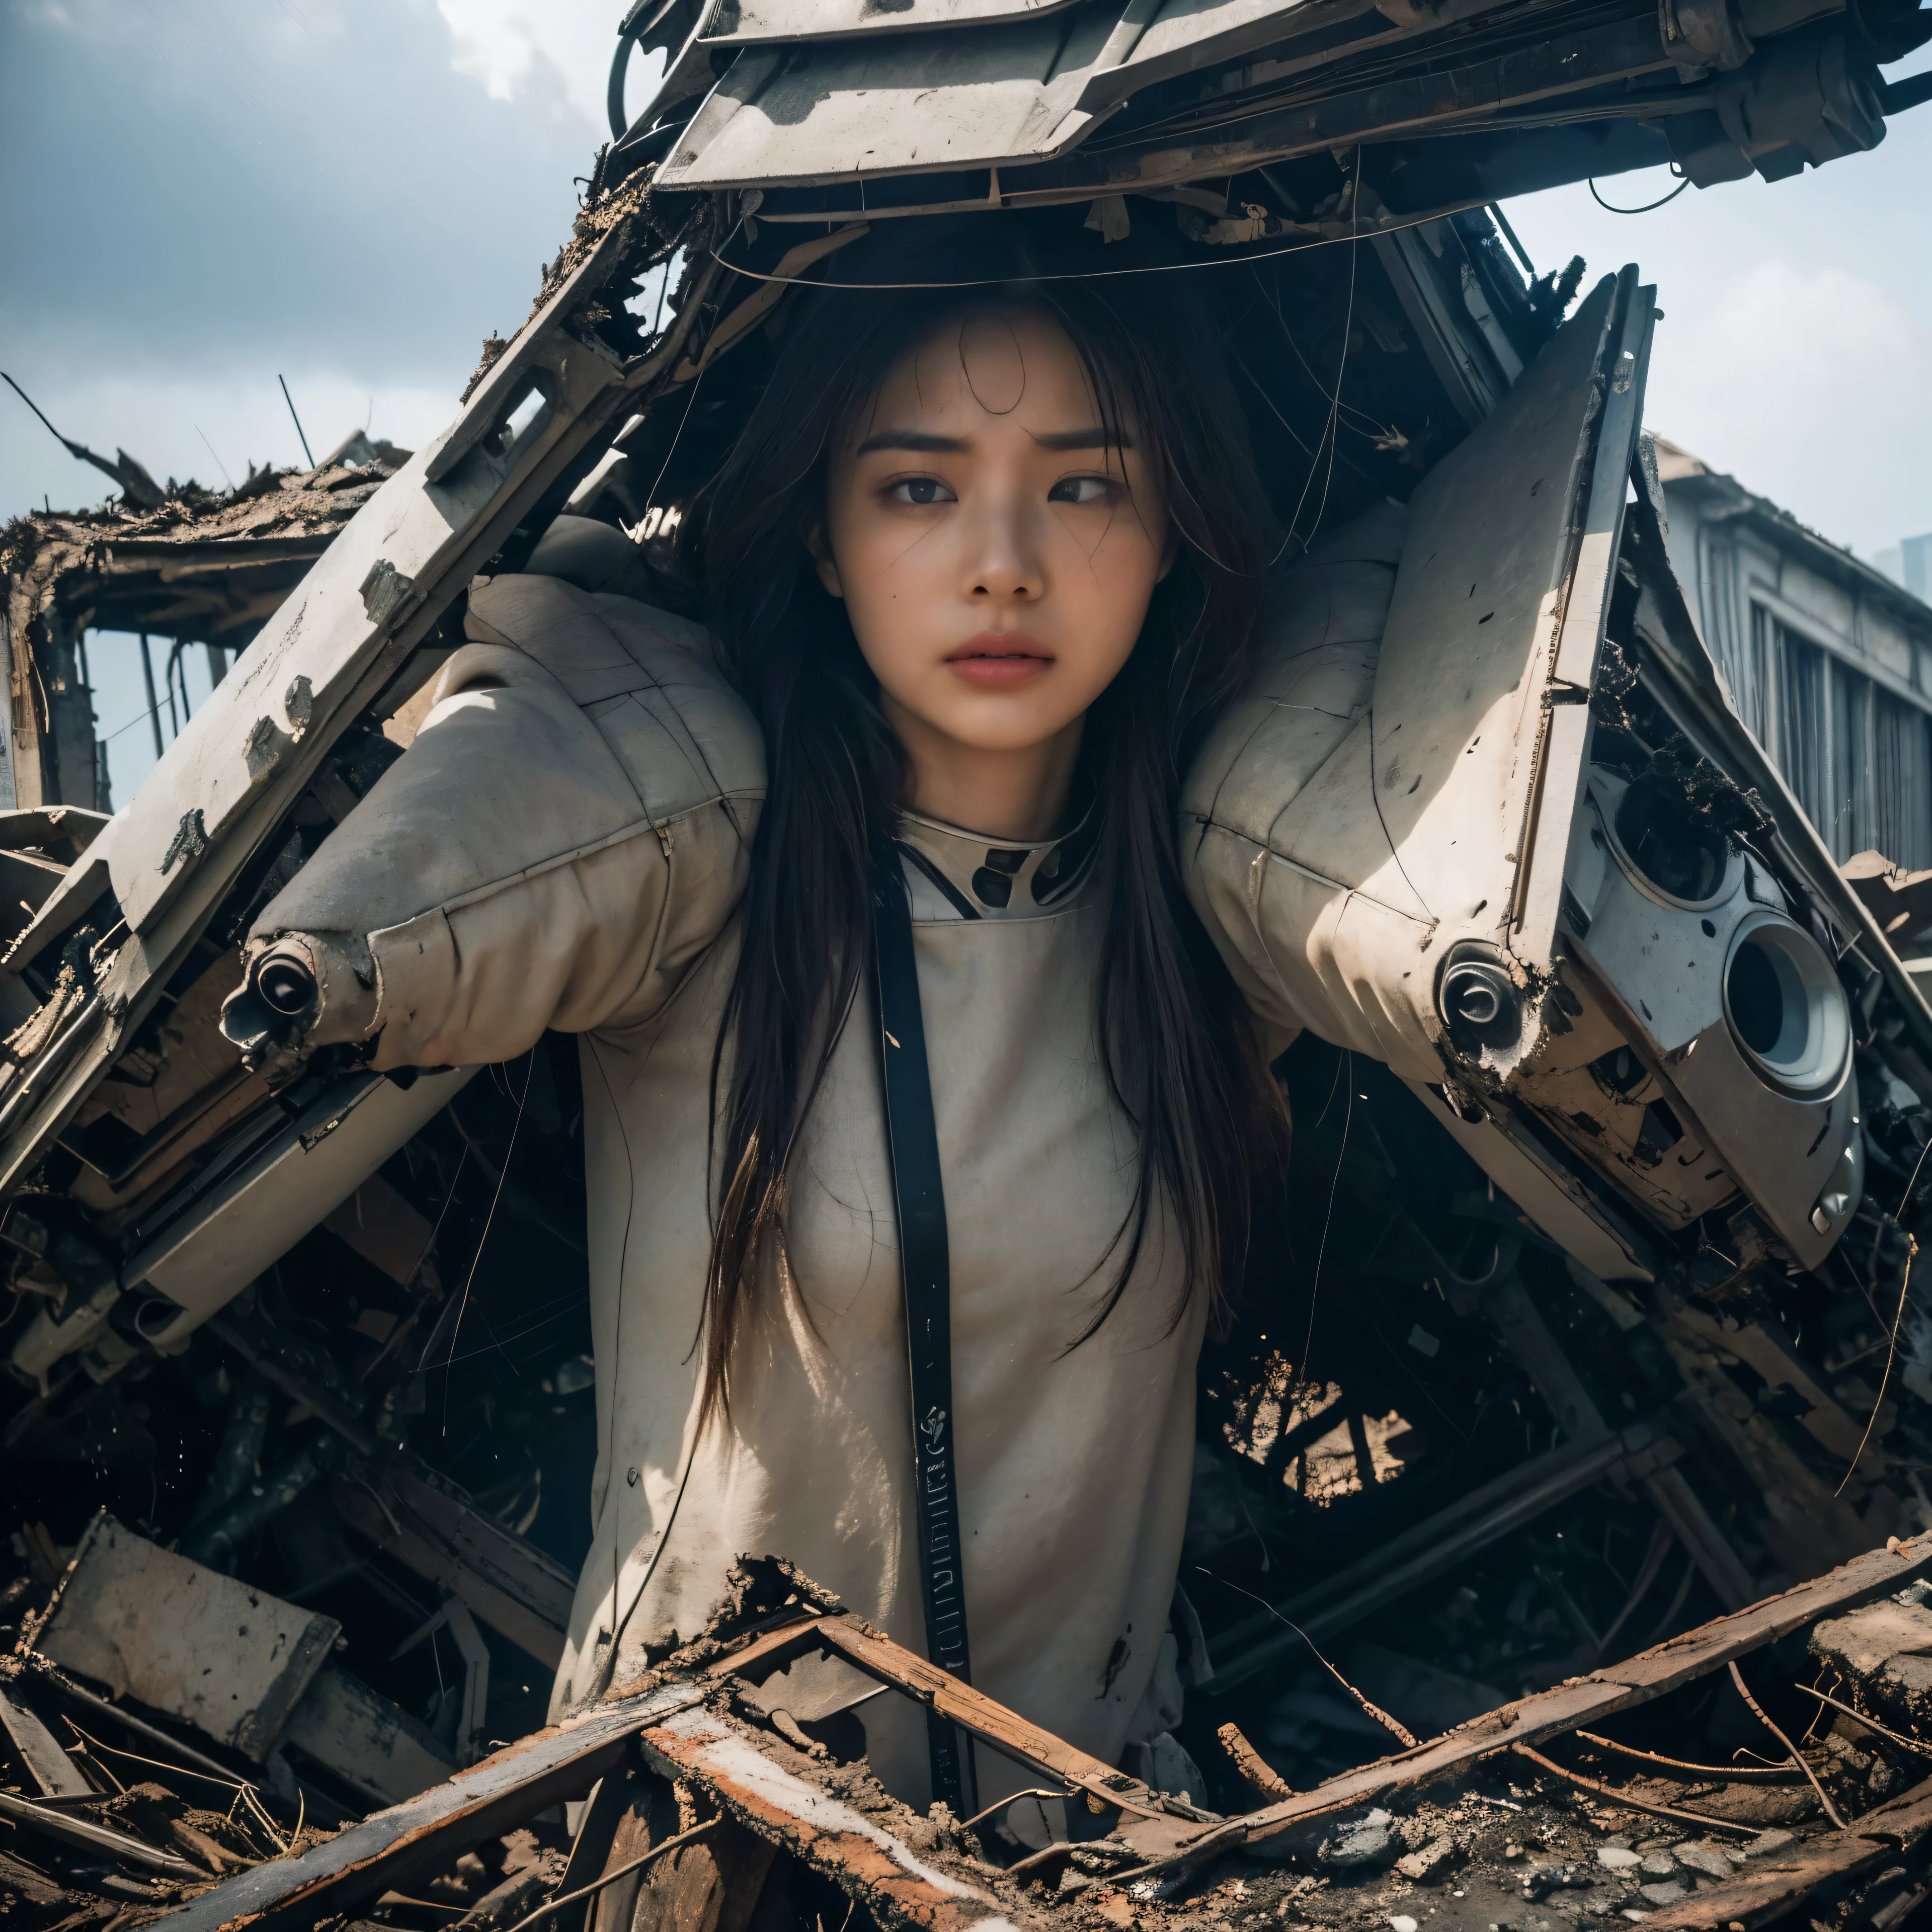 (highest quality、4K、High resolution、master piece: 1.2)、Super detailed、real: 1.37、Natural light、Portrait、surreal colors、futuristic style、Crumbling cityscape、Overgrown vegetation、Foggy atmosphere、Contrasting shadows、tattered clothes、A strong and confident gaze、Abandoned Objects、desolation、Destroyed building silhouette、vivid graffiti、Empowering pose、hair fluttering in the wind、Expressive facial features、unforgettable beauty、Dramatic sky、eerie clouds、intricate details、urban decline、post-apocalyptic setting、Ruins in nature 、Majestic Skyline、Desperate struggle、Creepy Presence、Thought of power、Enhanced Thought of power、intensity of emotions、Tense atmosphere、heroic attitude、intense action、Fearless Determination、Survival from all odds、Dangerous landscapes、Iconic battle、cinematic composition、epic showdown、A moment frozen in time、mysterious aura、fortitude、Women&#39;s Support、strong female protagonist、Fascinating story、Women's poweerce determination、Empowering Stories、(Behind her, a giant invader mech is on fire and collapsing.:1.55)
